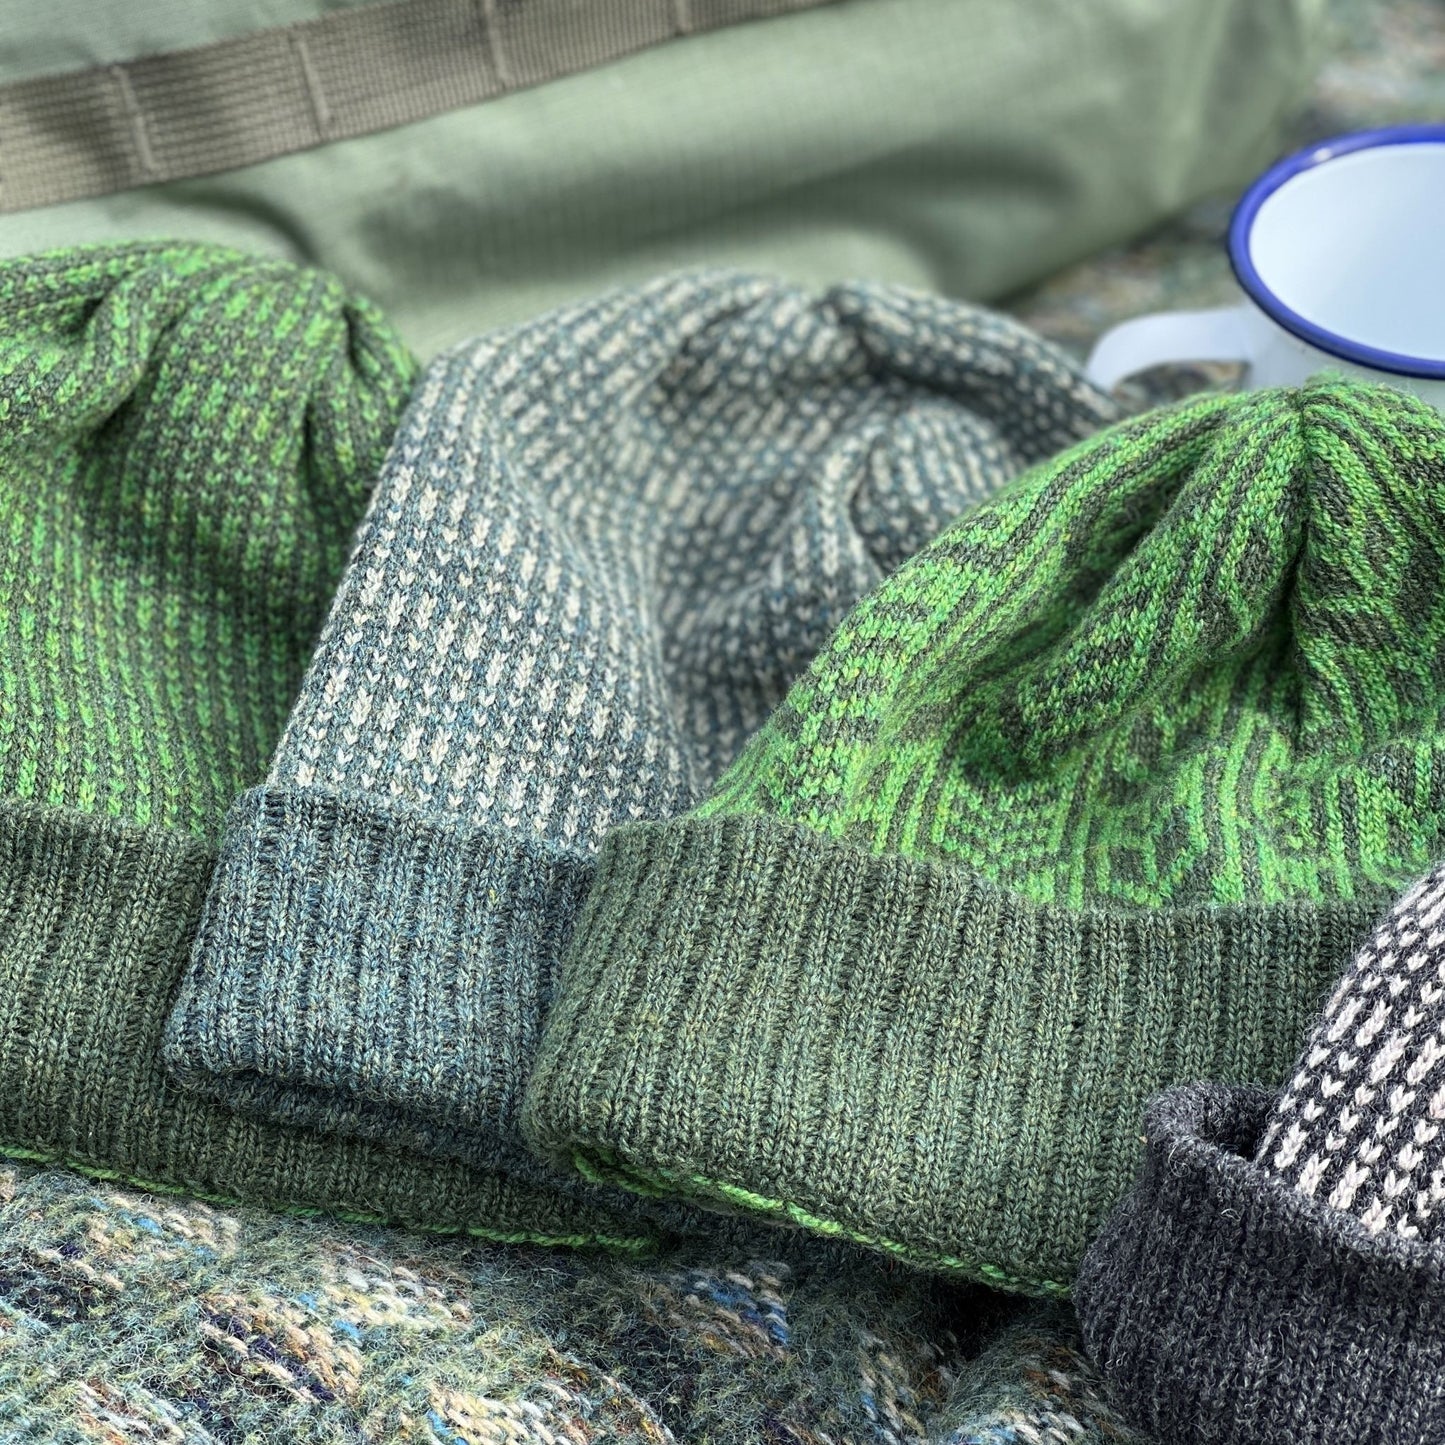 Our knitted woollen beanie hats are made from the finest Merino lamb’s wool, and hand framed, seen here in Juniper and Moss